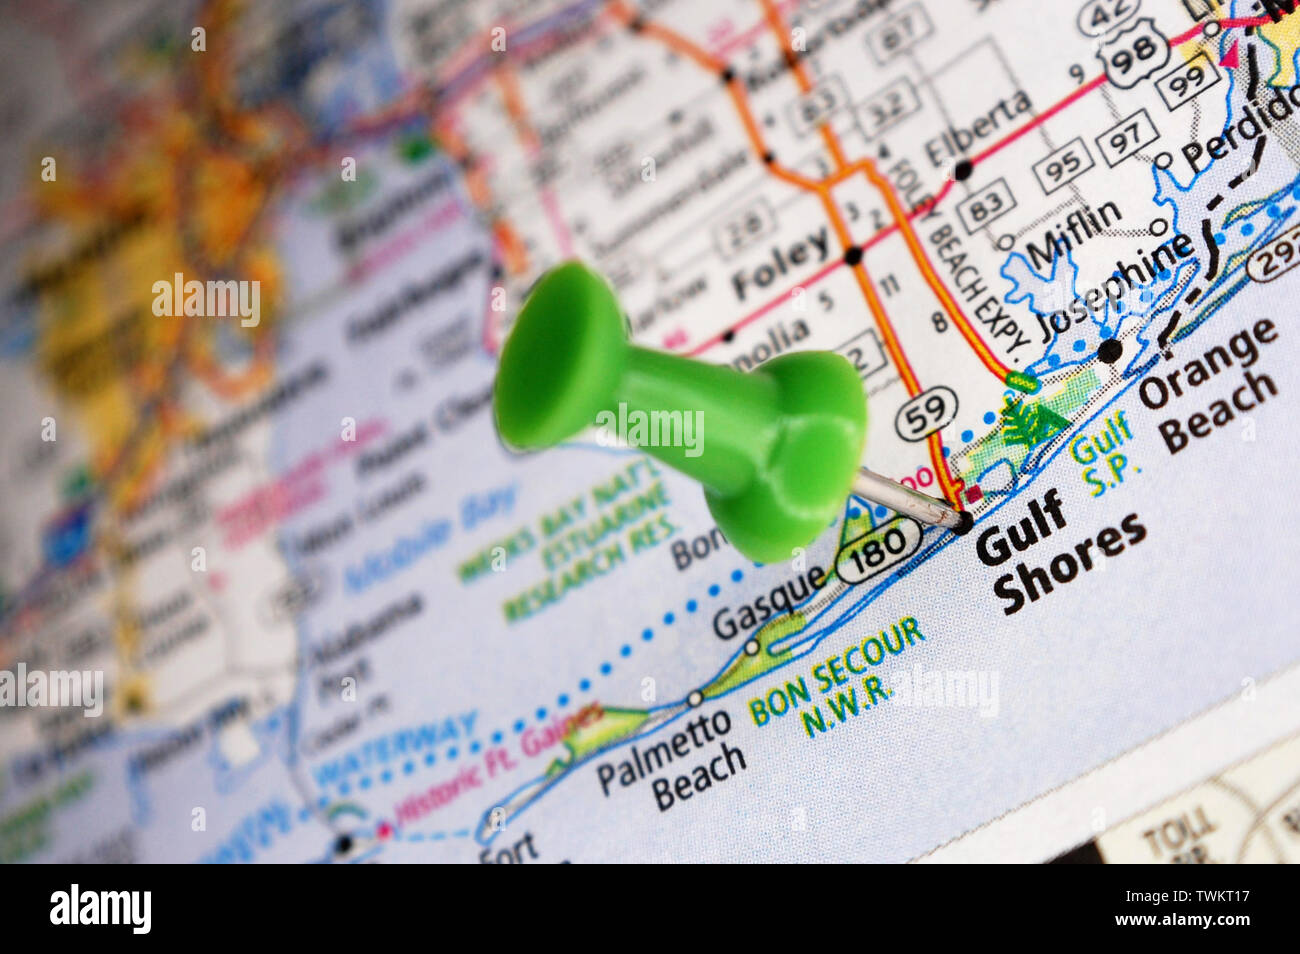 A map of Gulf Shores, Alabama marked with a push pin. Stock Photo